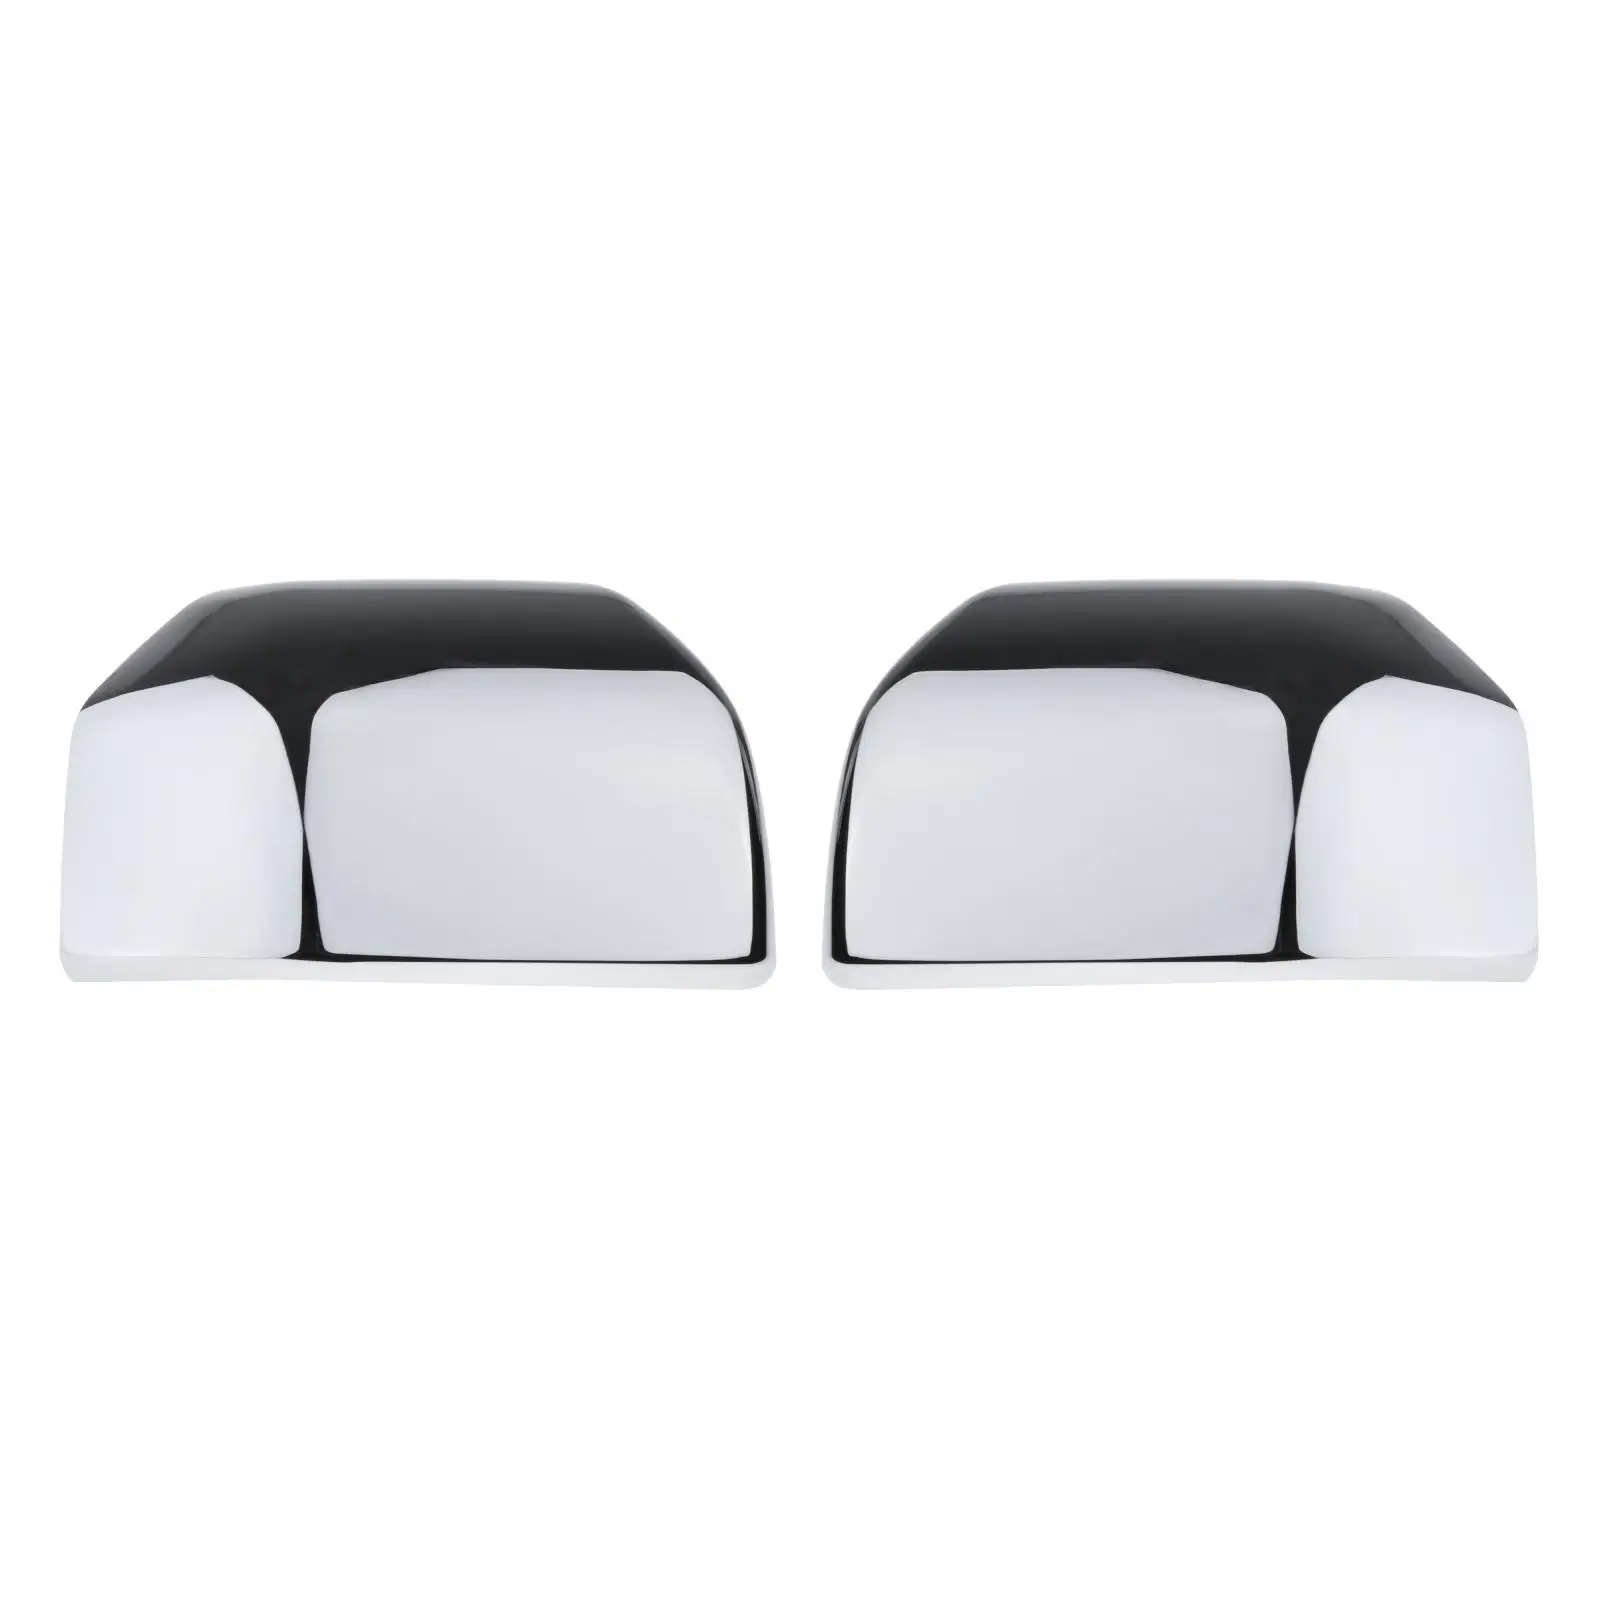 2x Car Rearview Mirror Cover Side Mirror Cover for 2015-2020 Ford F150